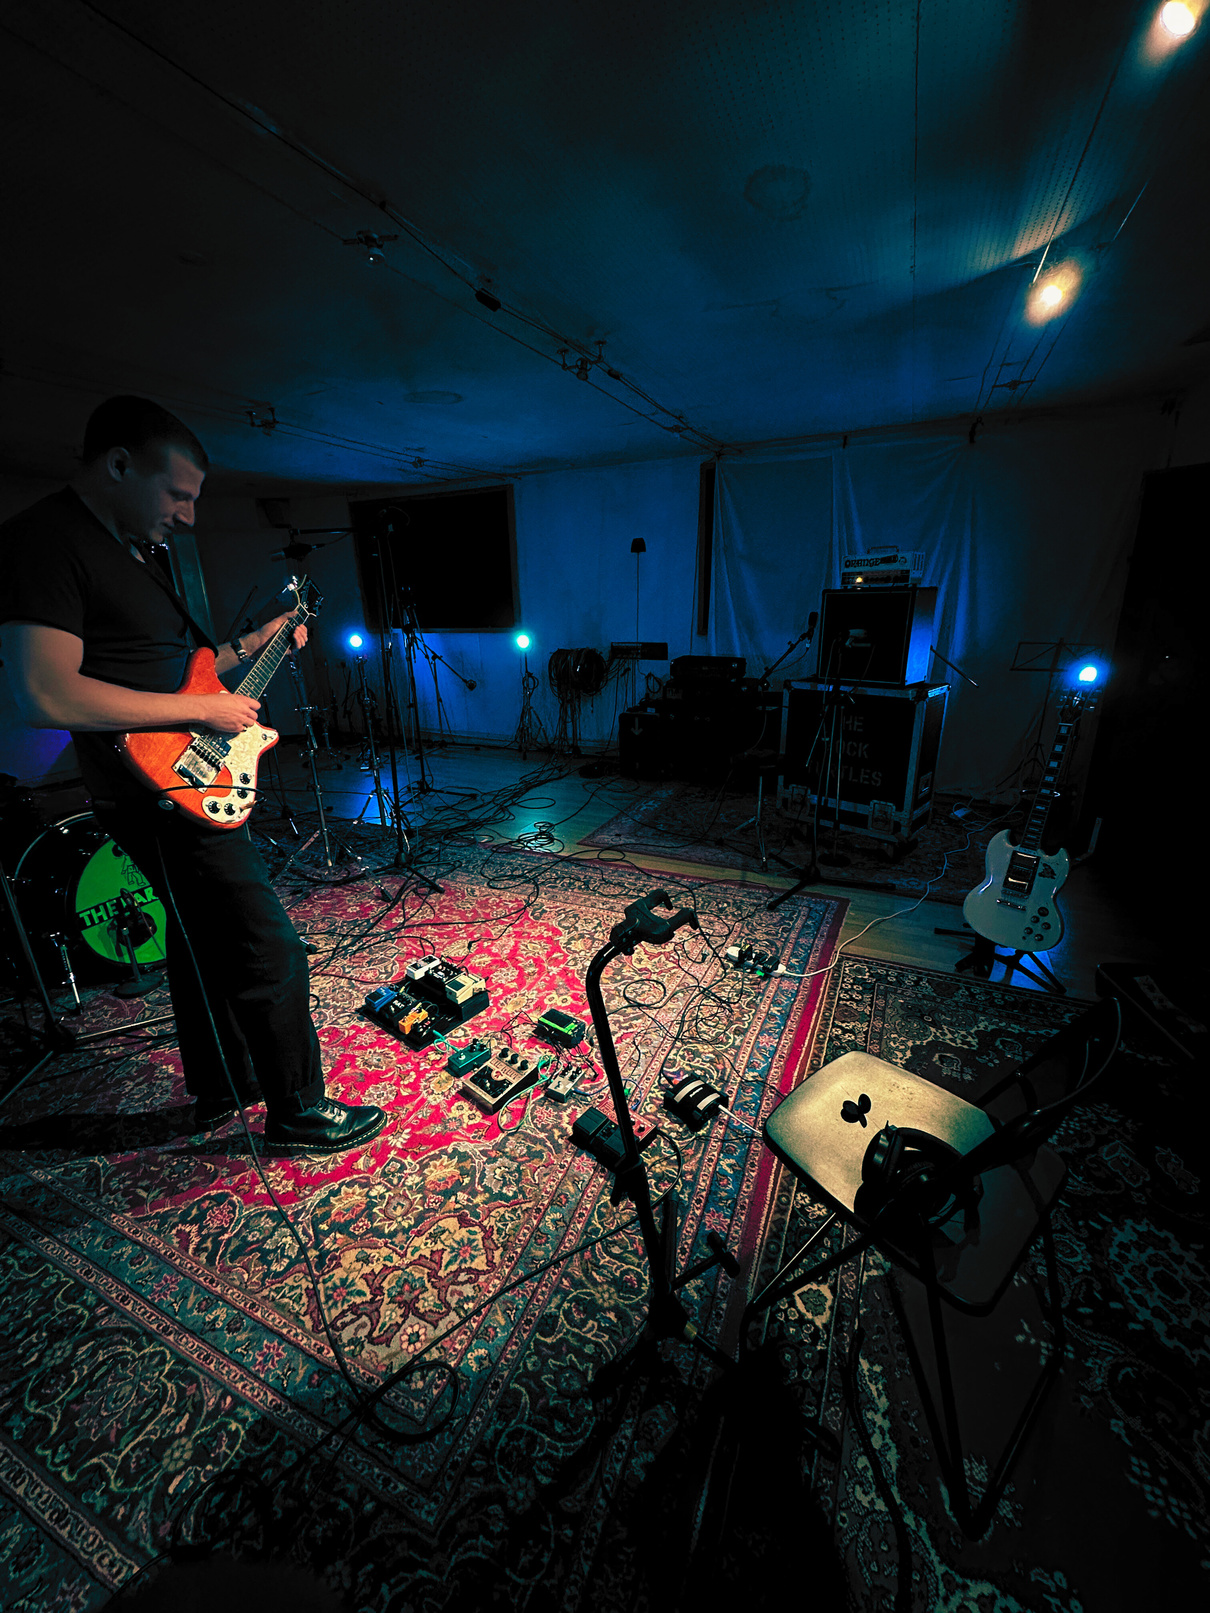 Boni playing guitar in the live room, staring down at his pedals set over a backdrop of toned down blue lighting with the fancy rug underneath everything.